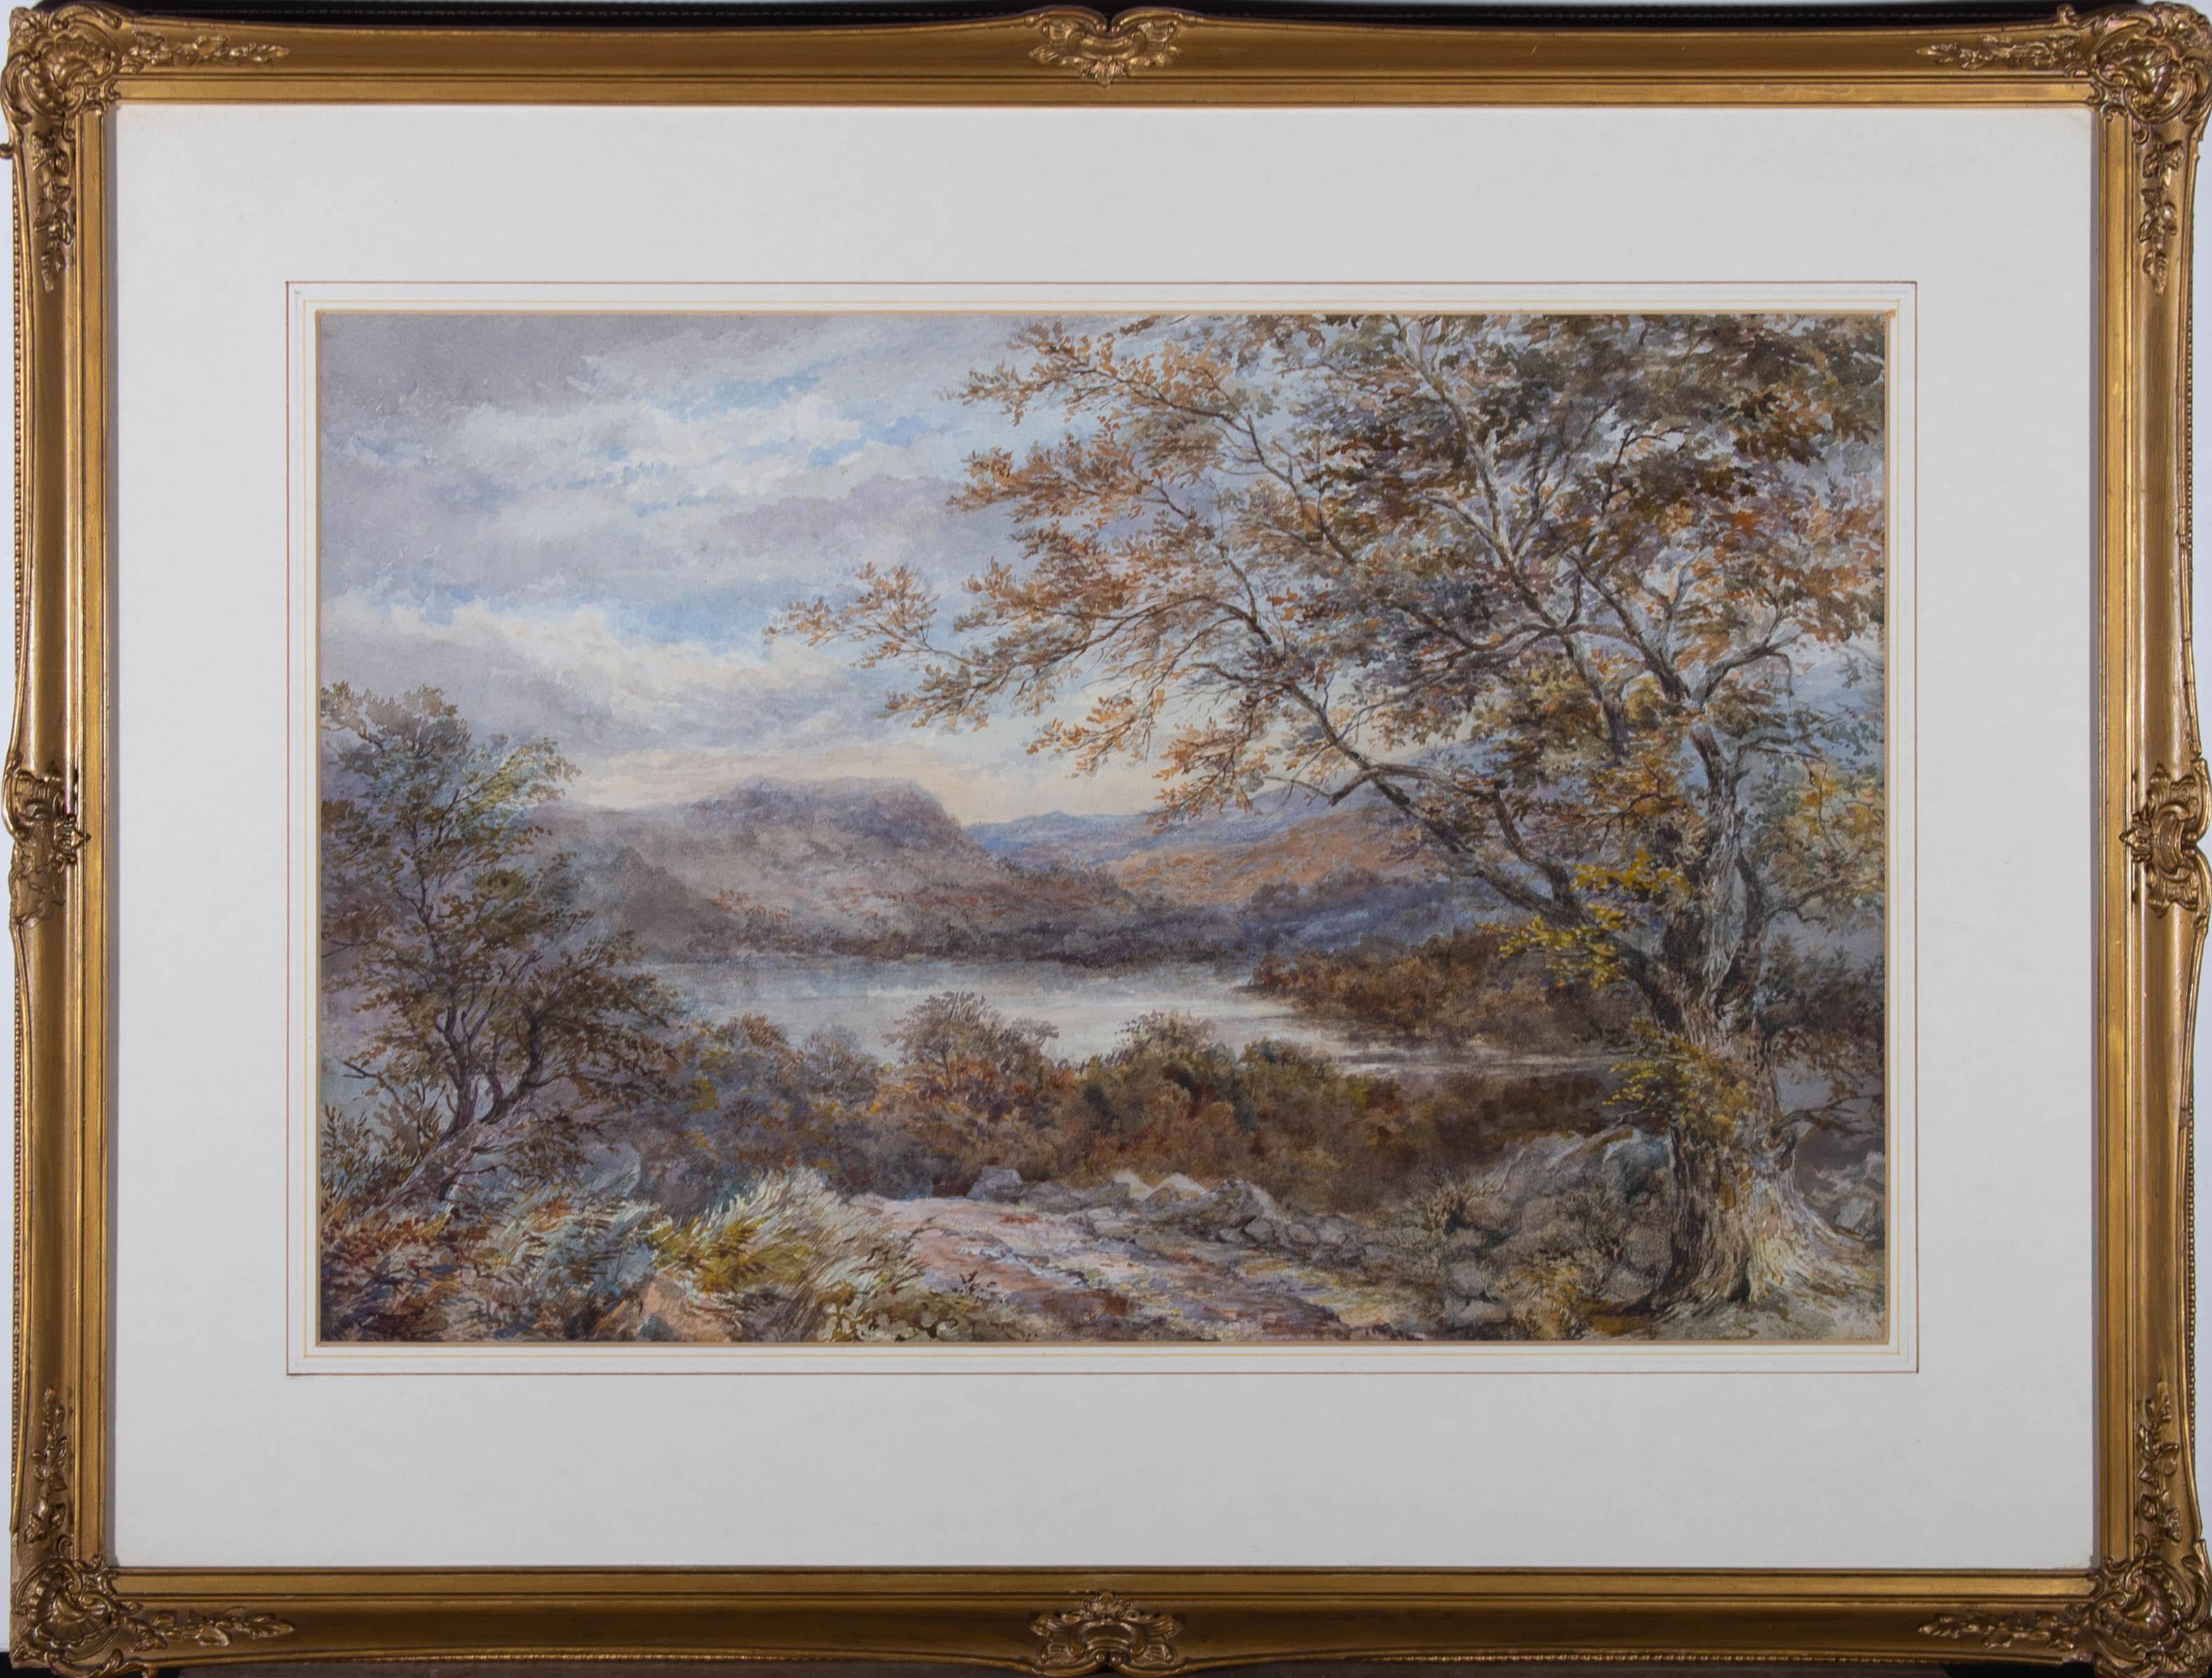 A fine watercolour painting by T. Thomas, depicting a landscape view of Lake Windermere. Signed faintly to the lower right-hand quadrant. There is a label on the reverse inscribed with the artist's name, title and date. Well-presented in a wash line